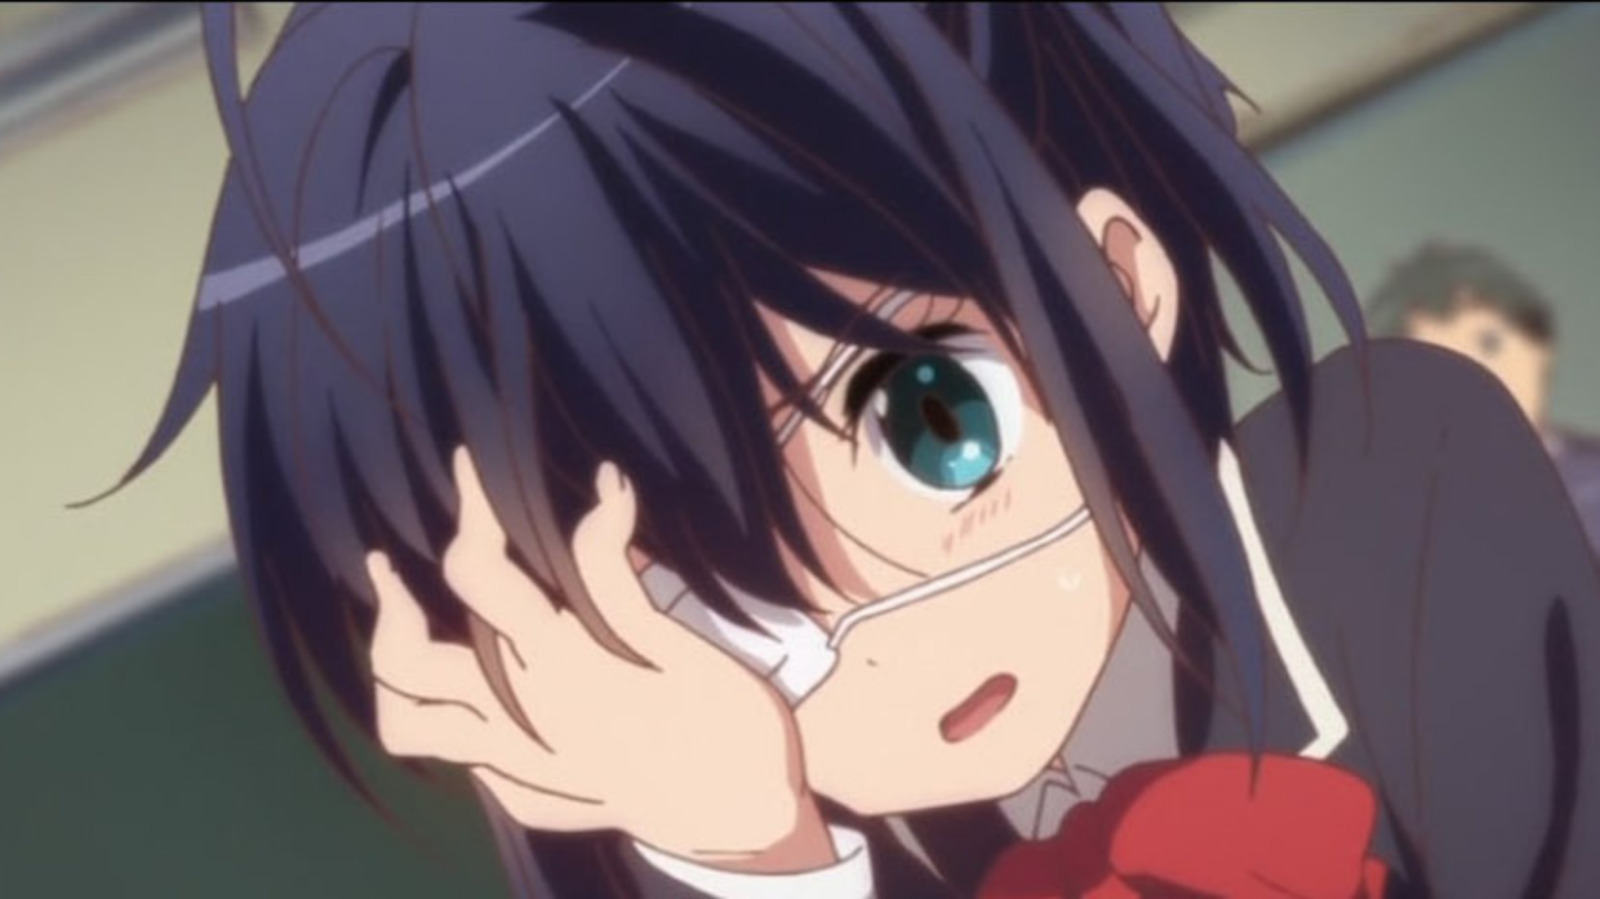 Love Chunibyo & Other Delusions Season 3 - What We Know So Far.